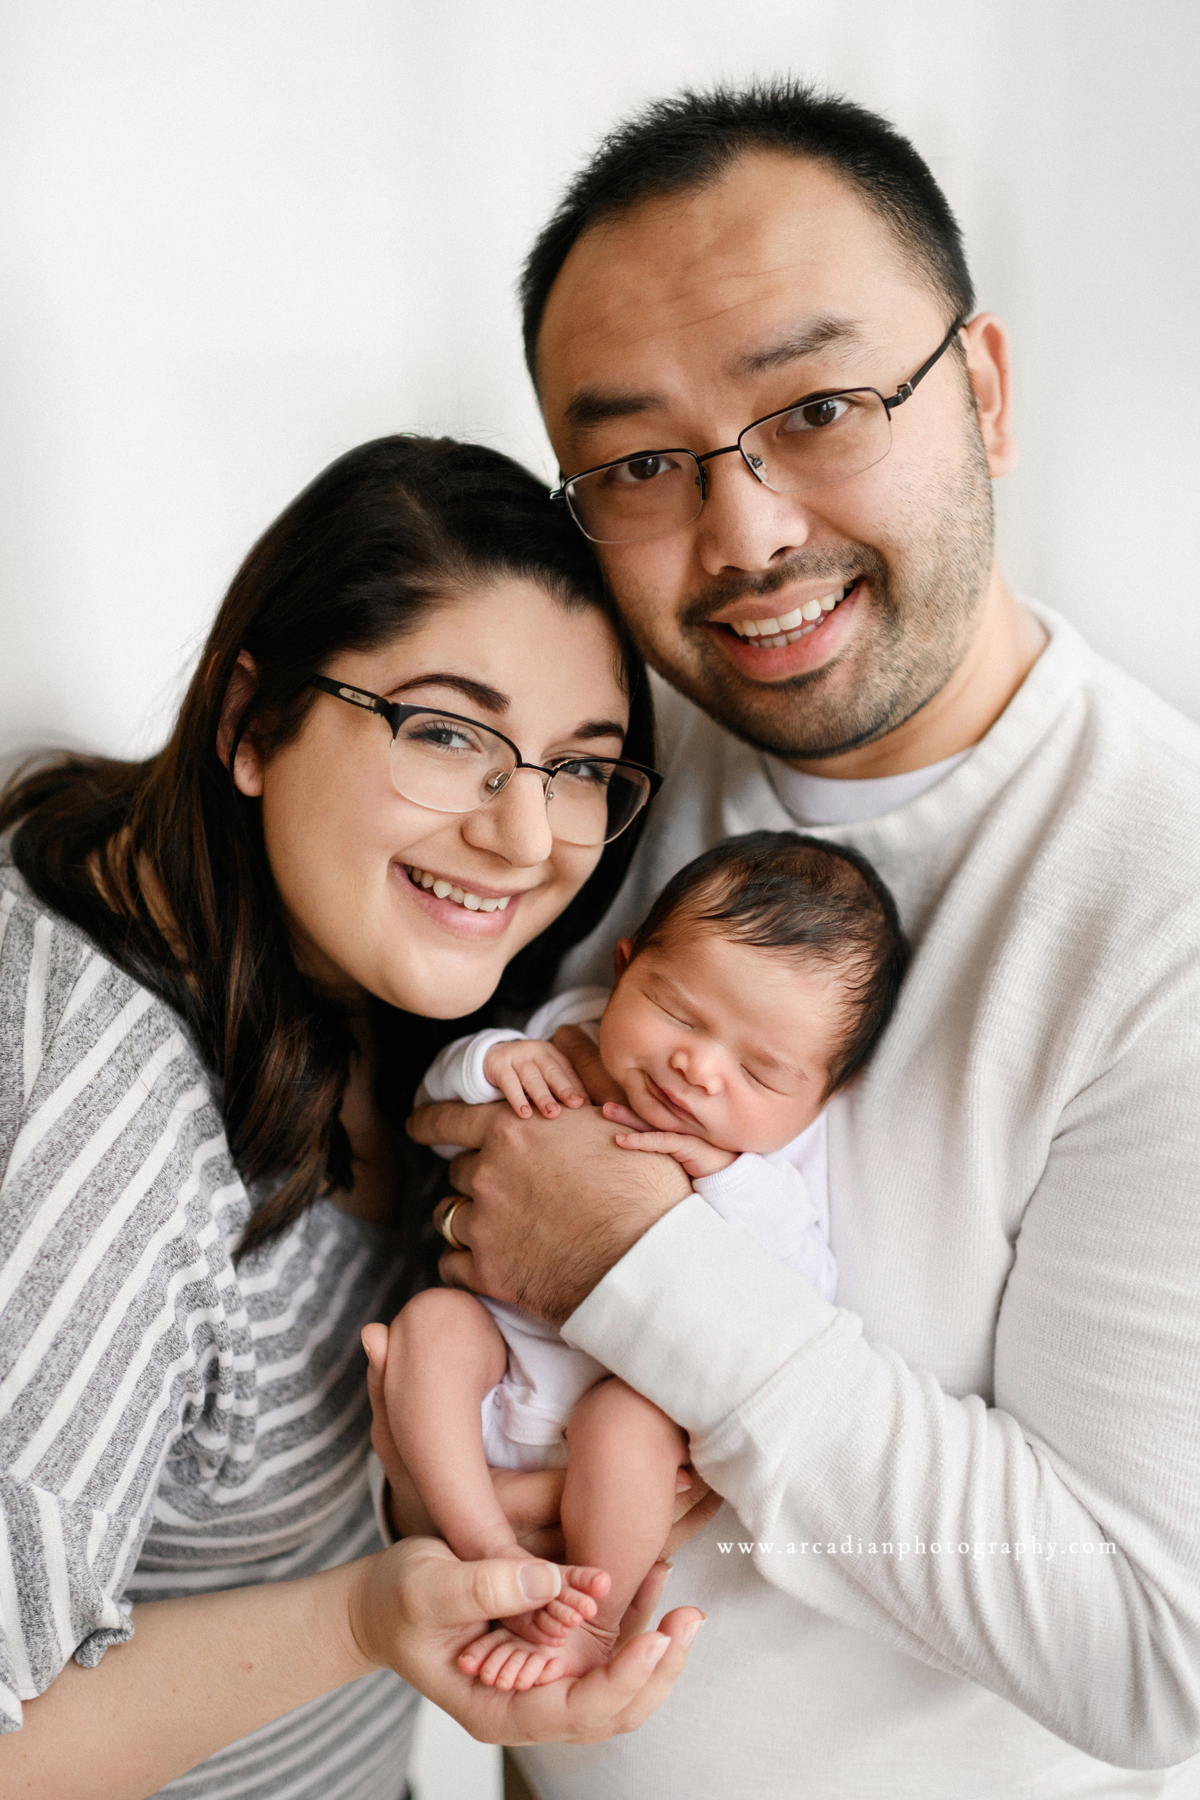 Newborn pose with mom and dad - learn more about booking newborn photos.